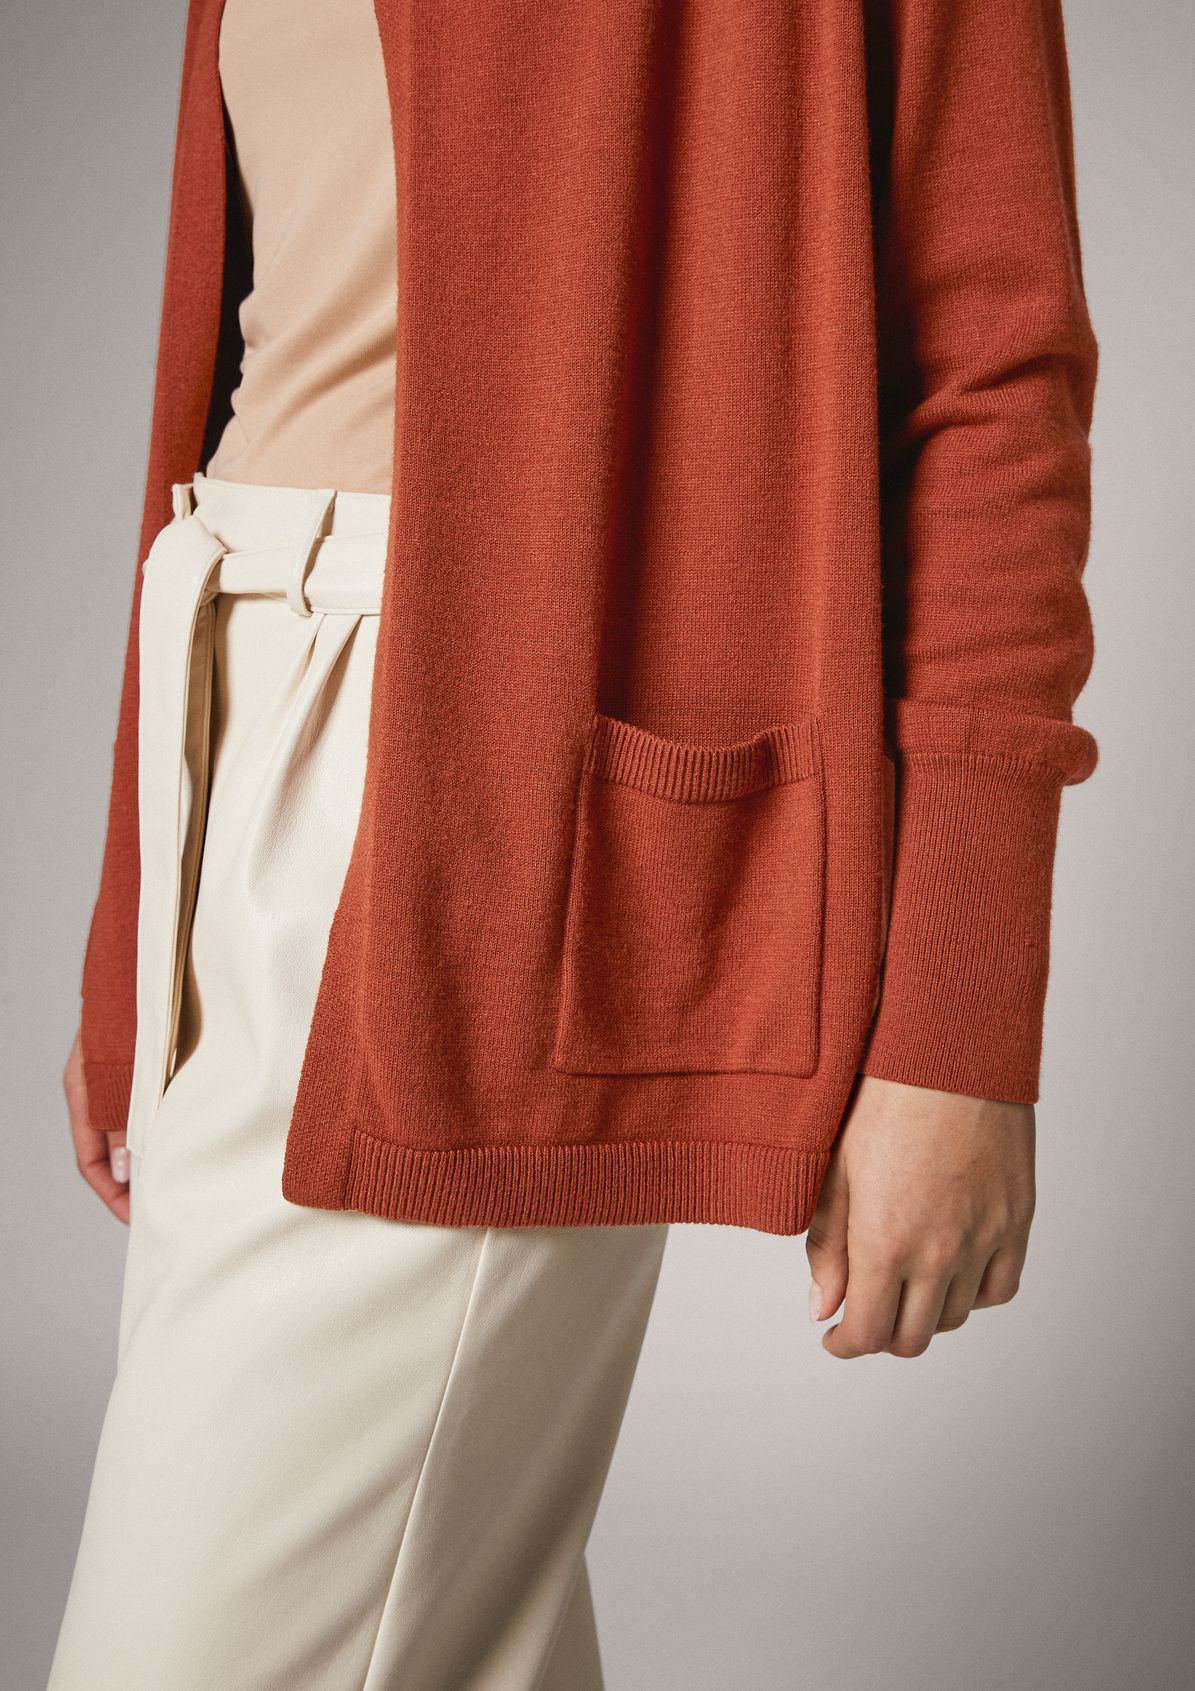 Soft, fine knit cardigan from comma